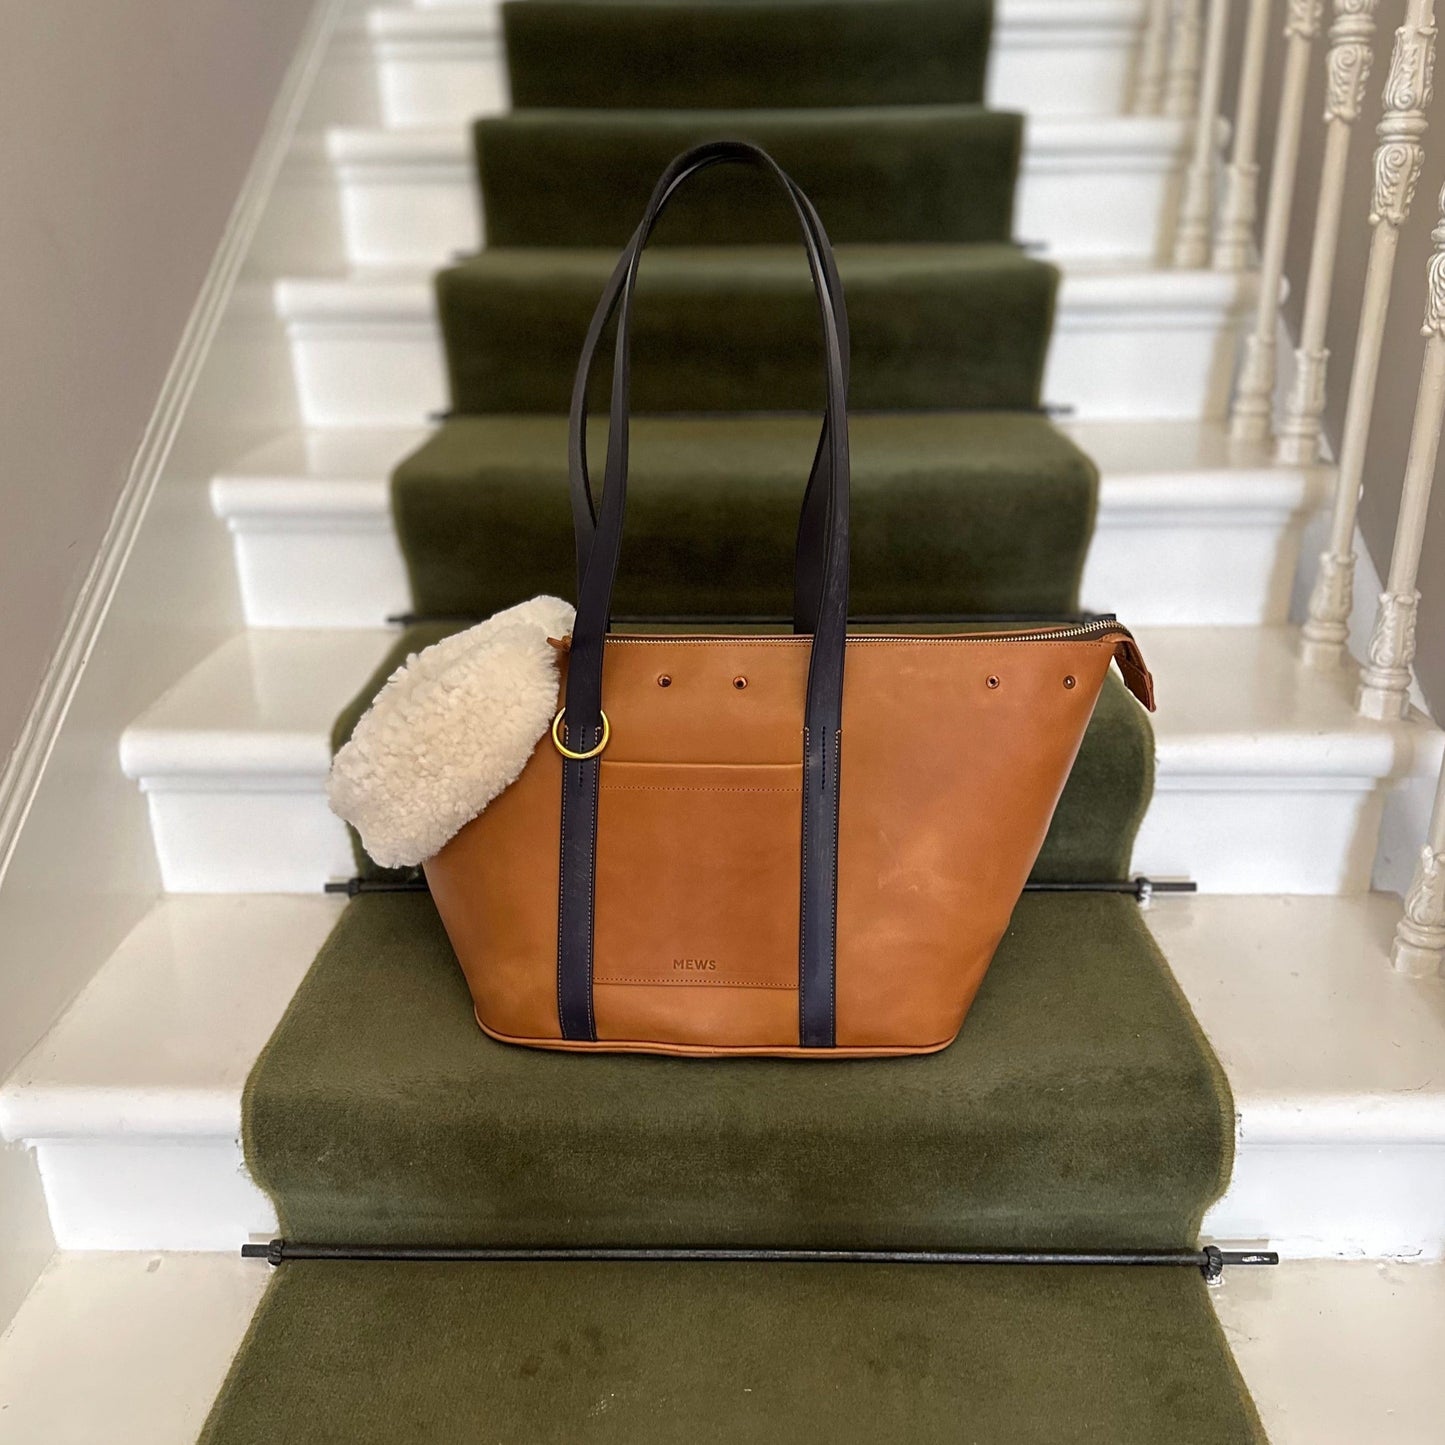 MEWS London Leather Dog Carrier